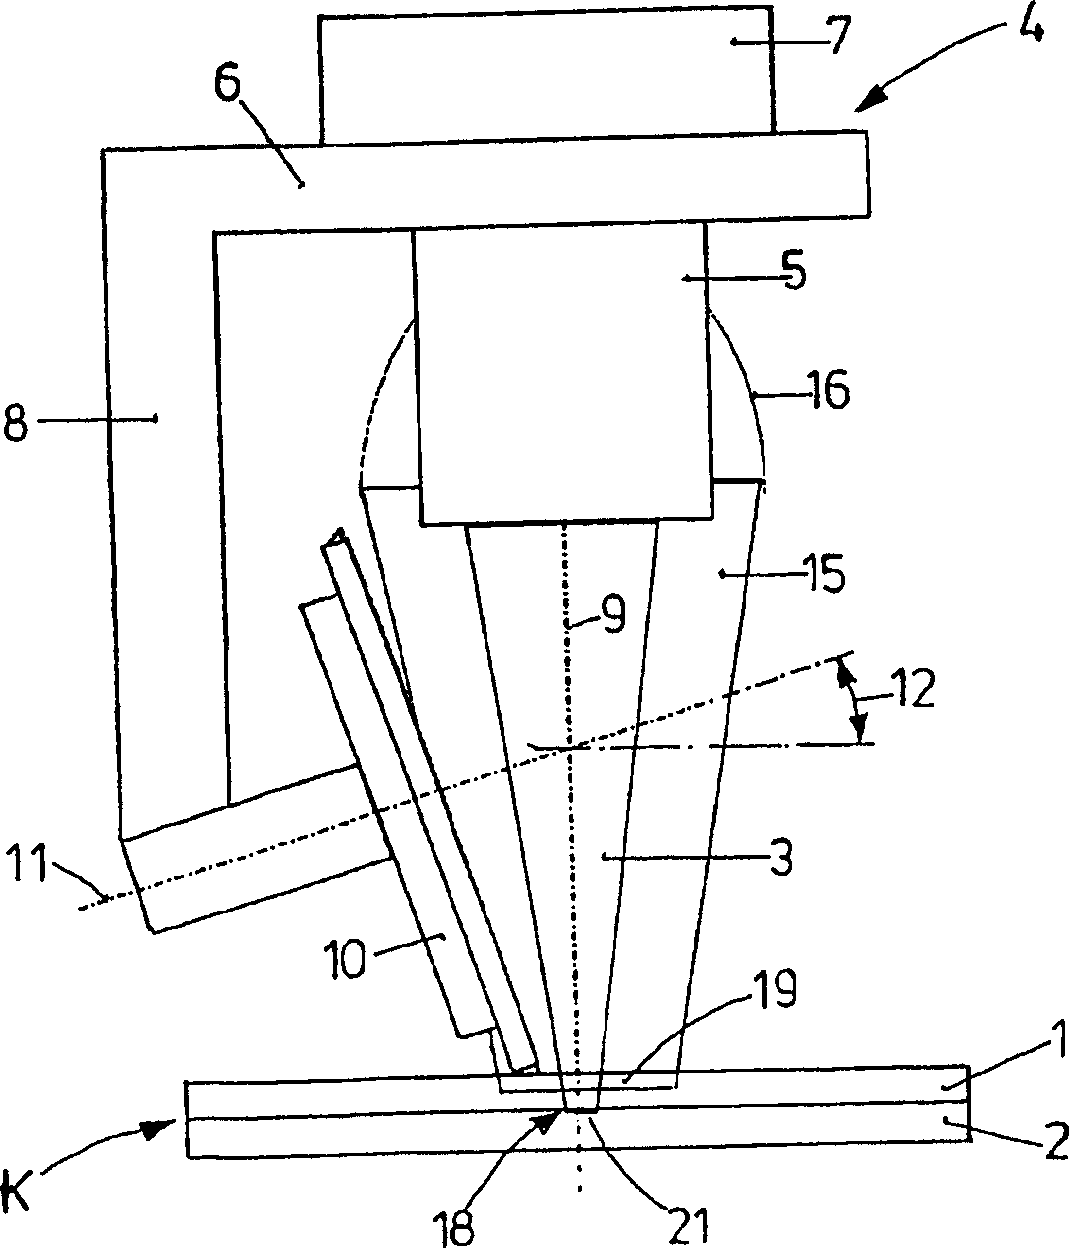 Method and device for welding thermoplastic material shaped parts, particularly for contour-welding three-dimensional shaped parts